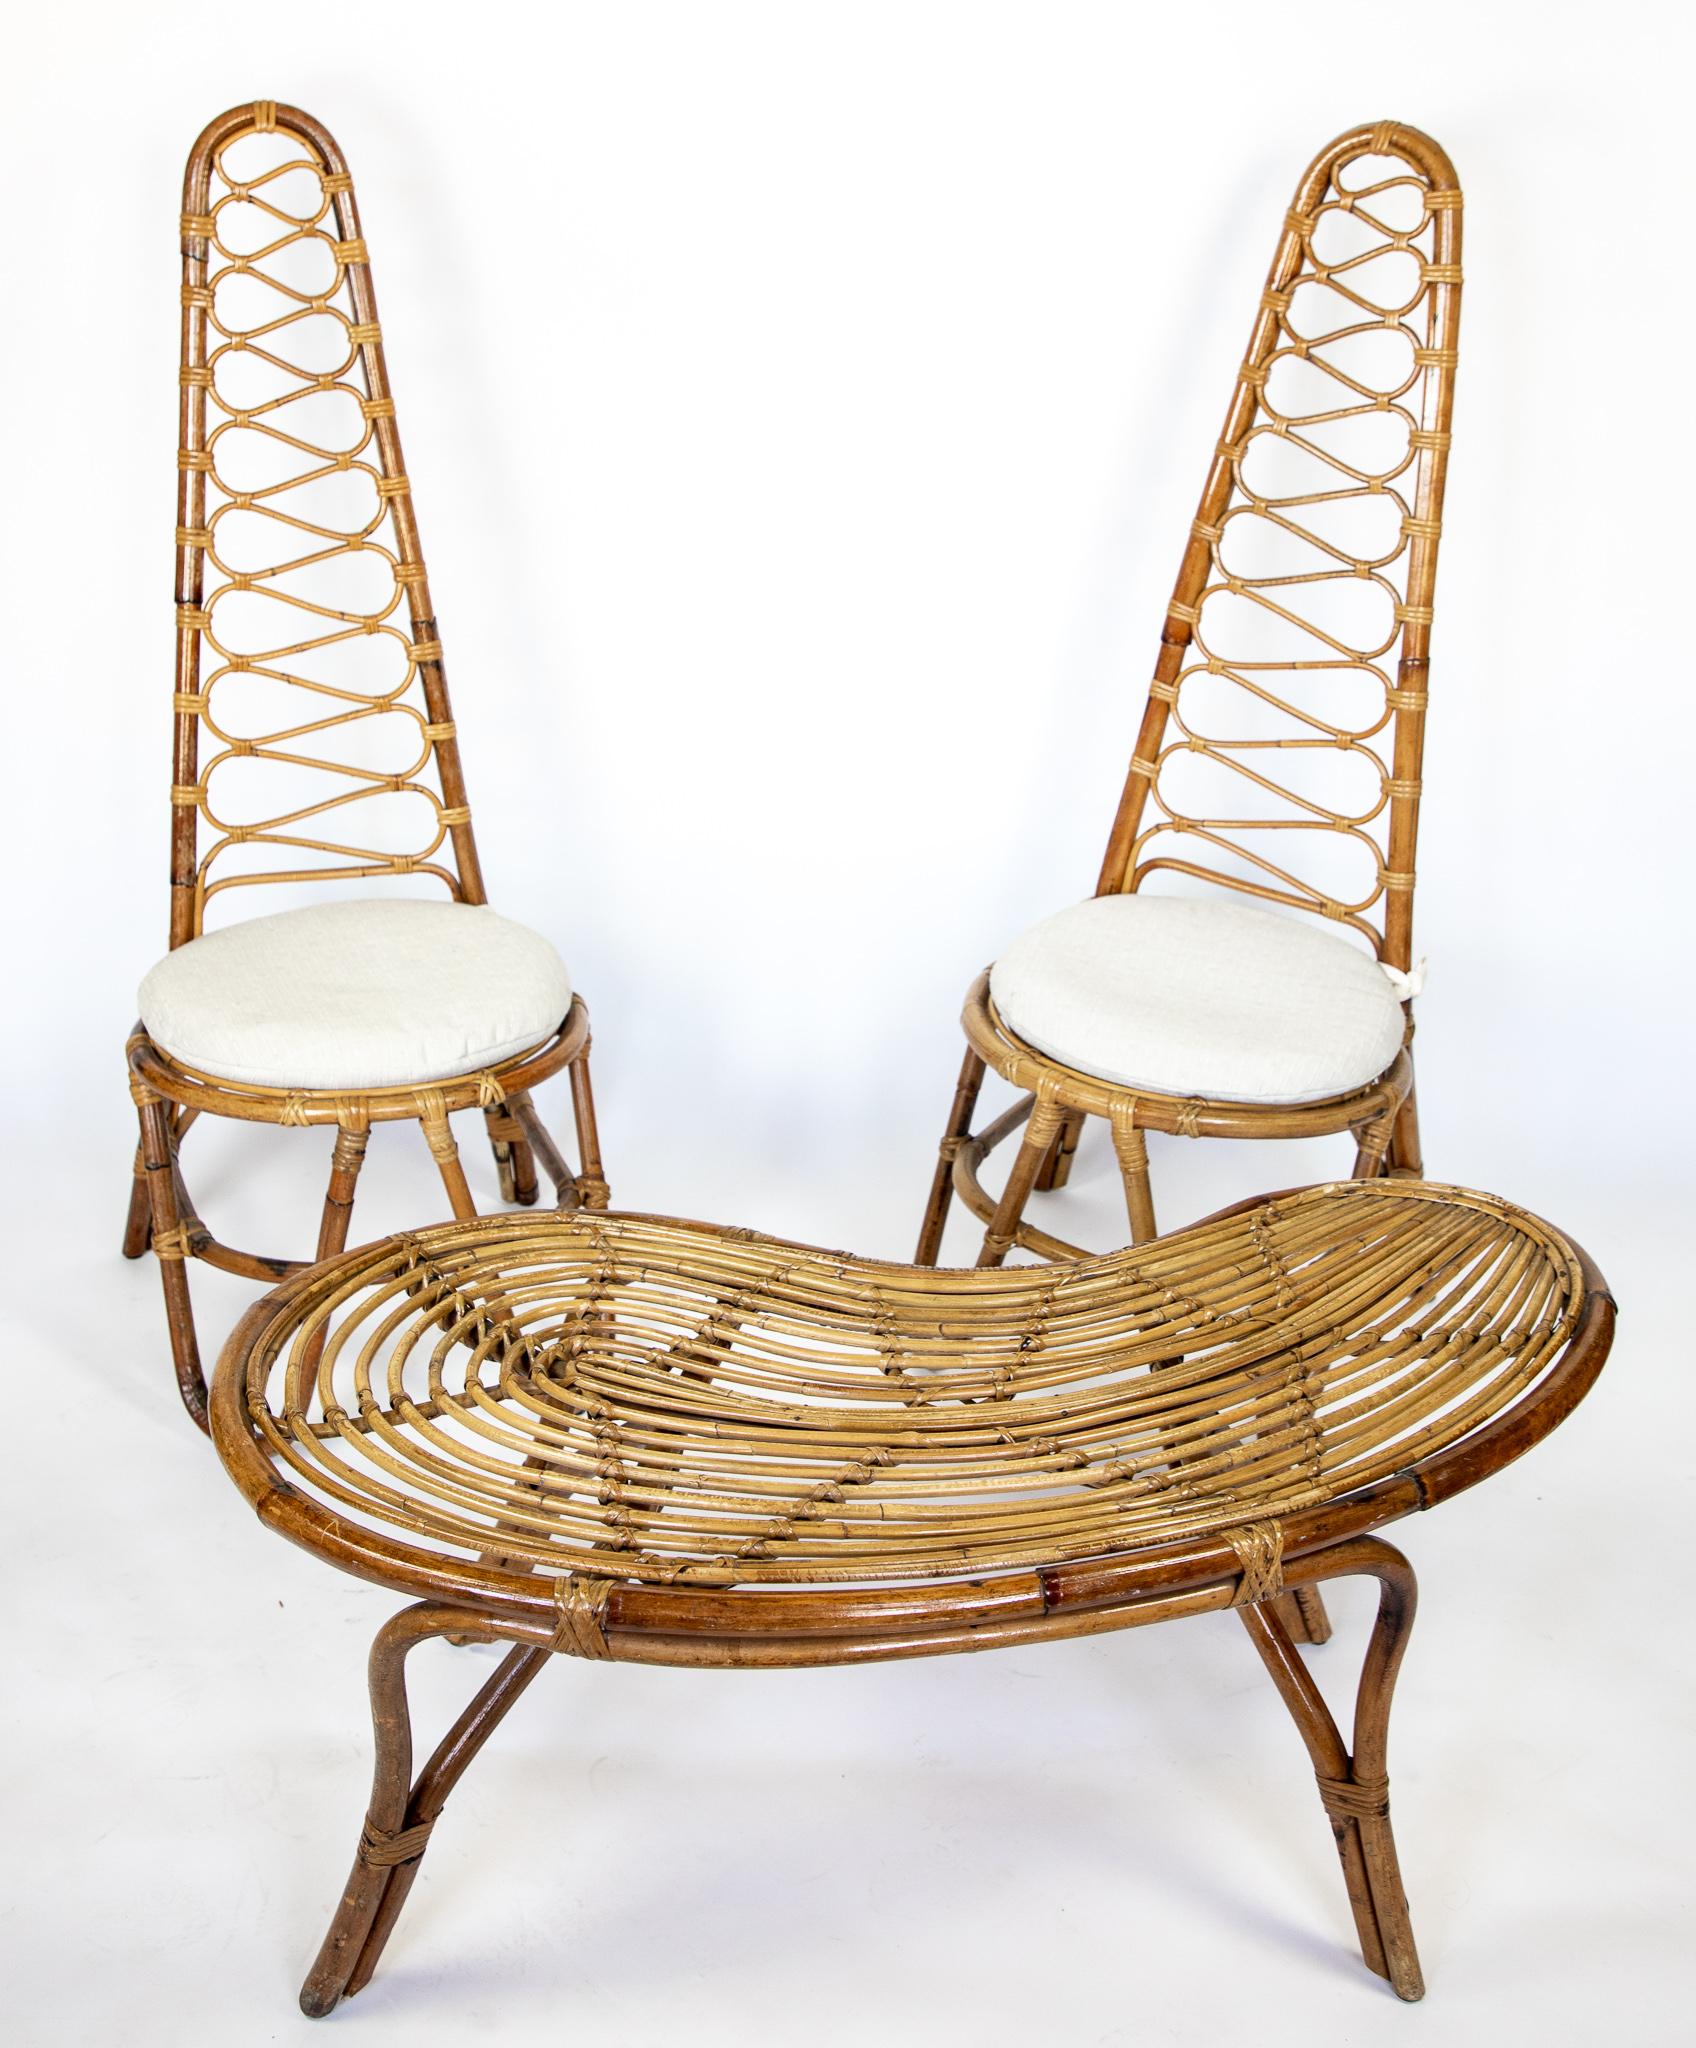 Mid-Century Modern high back rattan chairs and table, Italy 1960s.

This lovely set of two original Italian mid-century high back rattan chairs and a small table was often found in the entrance halls of the typical splendid villas in Italy in the